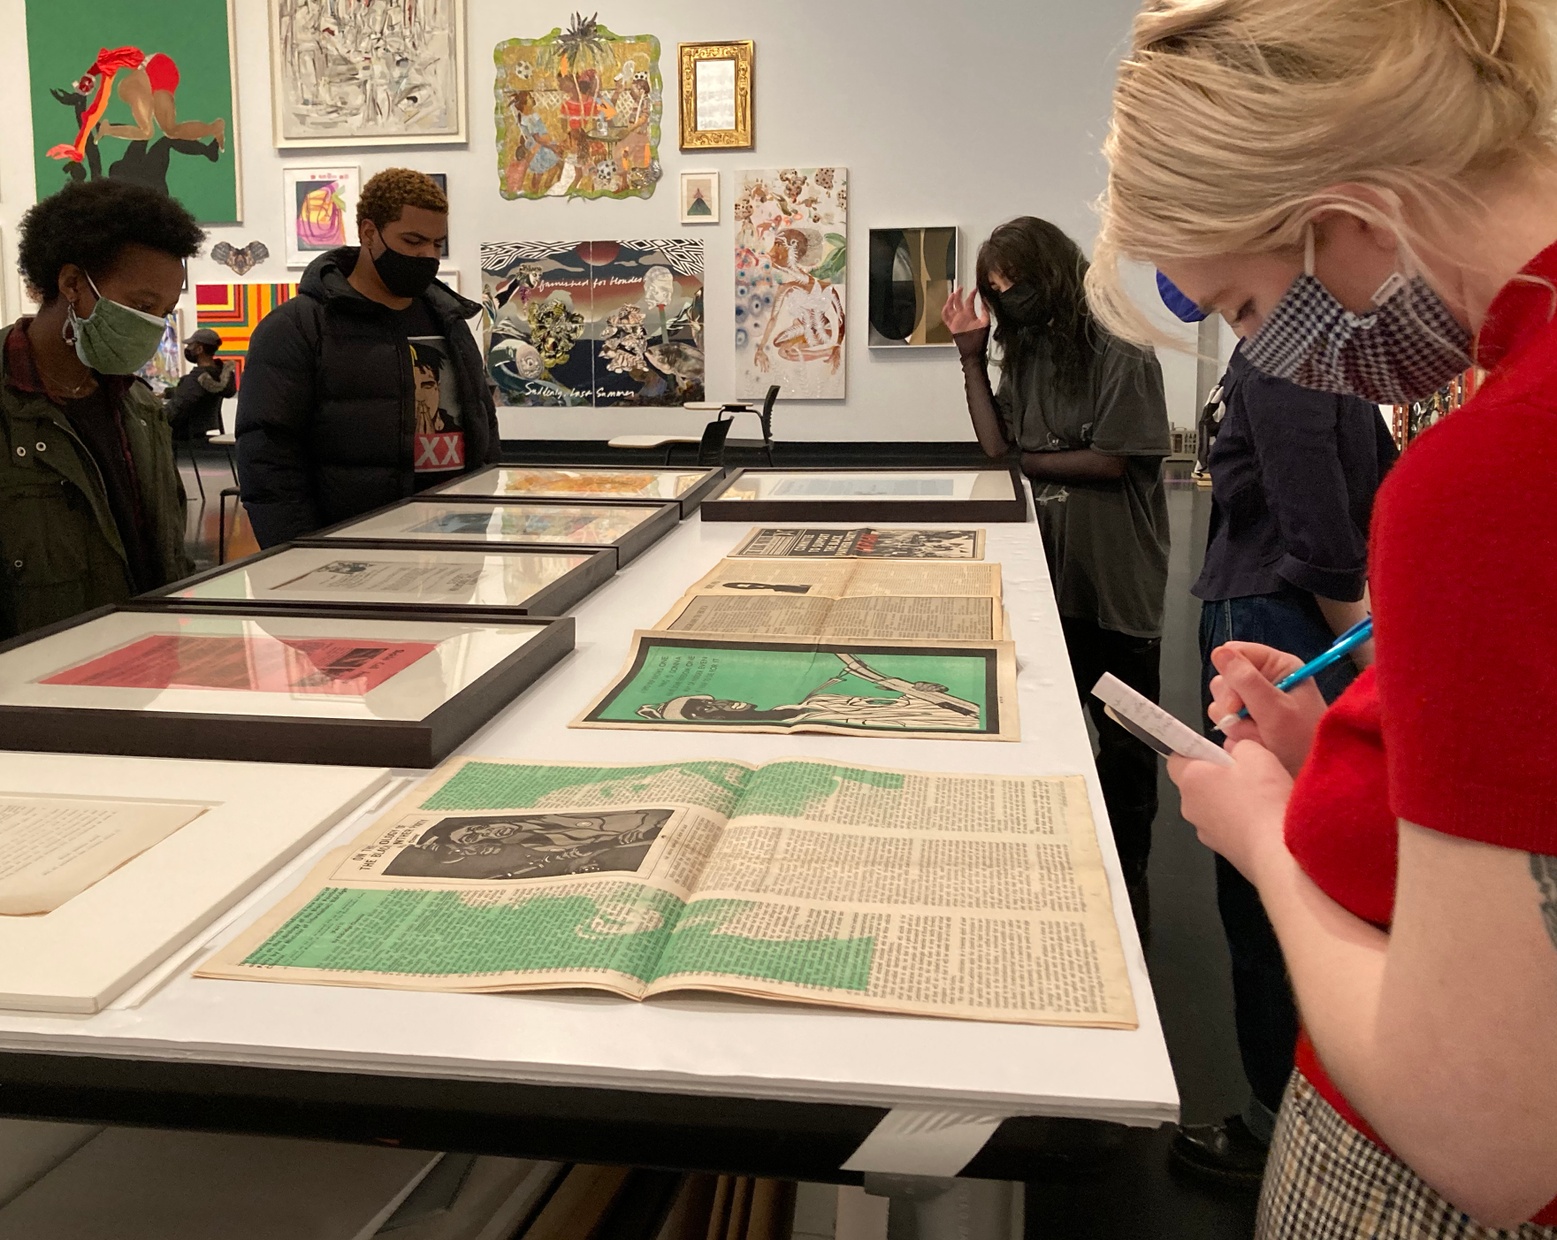 College students surrounding a table of framed and unframed materials taking notes.